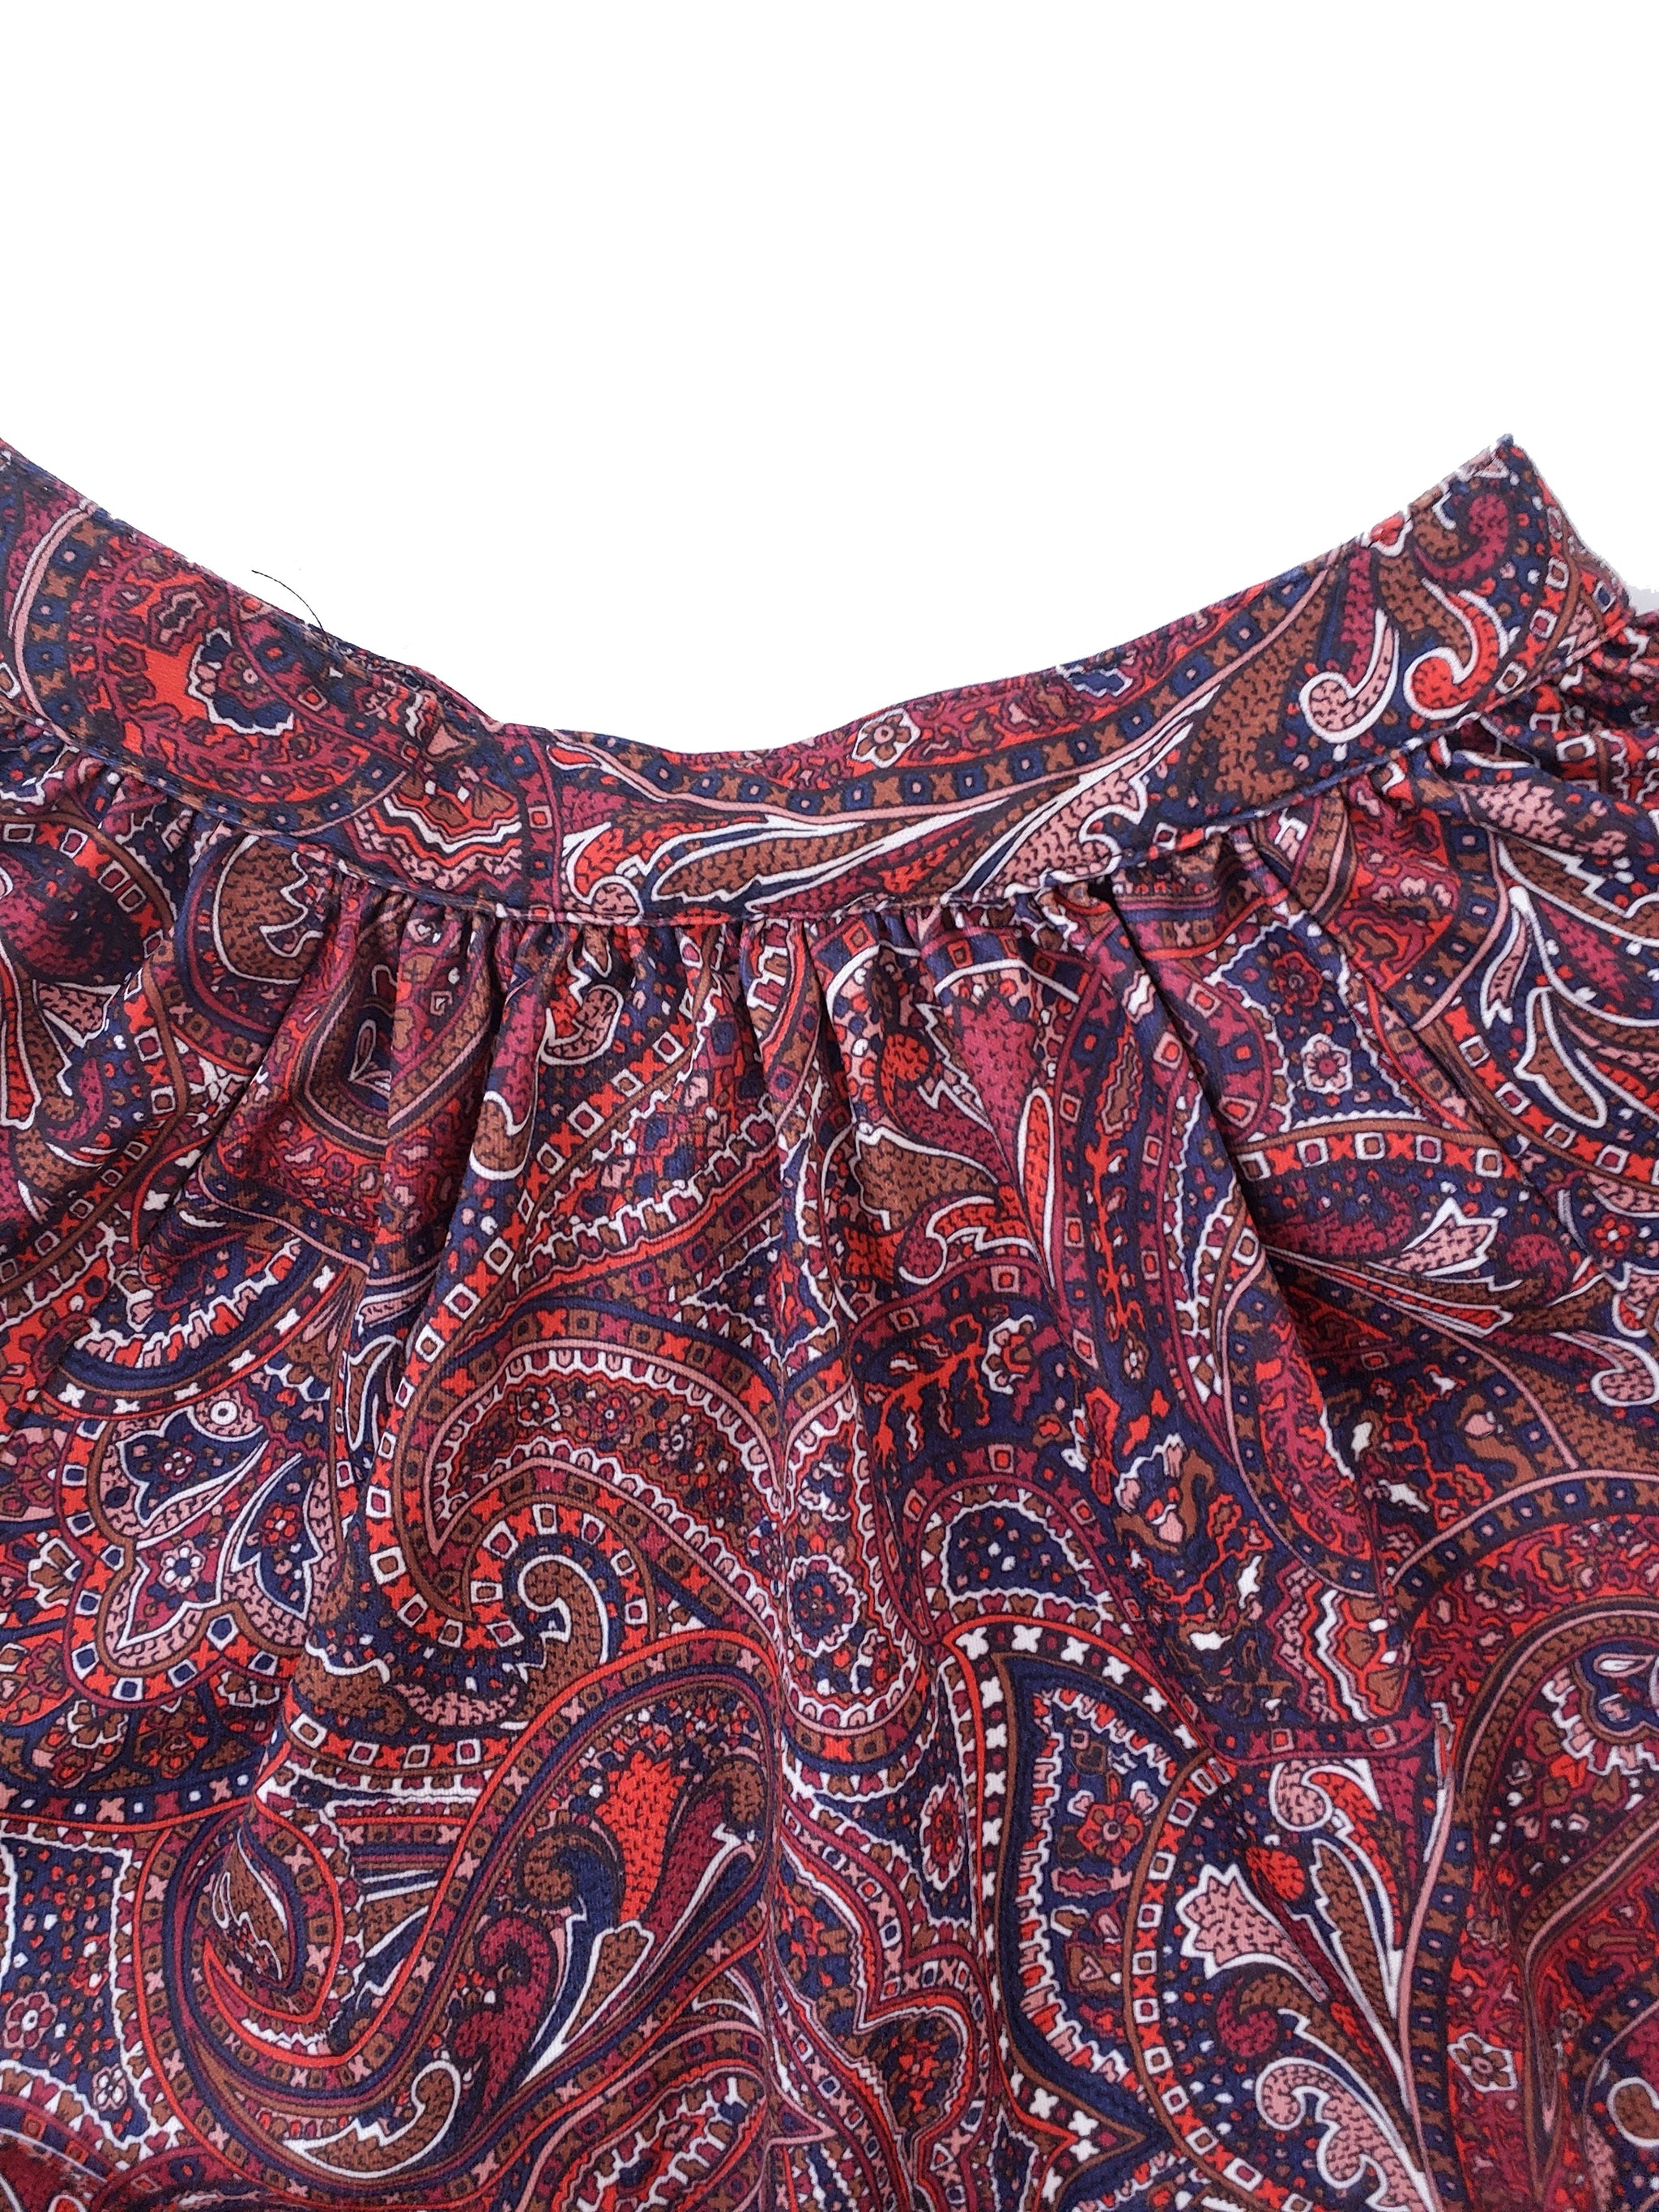 Vintage 70s Red/Blue Paisley Boho Top